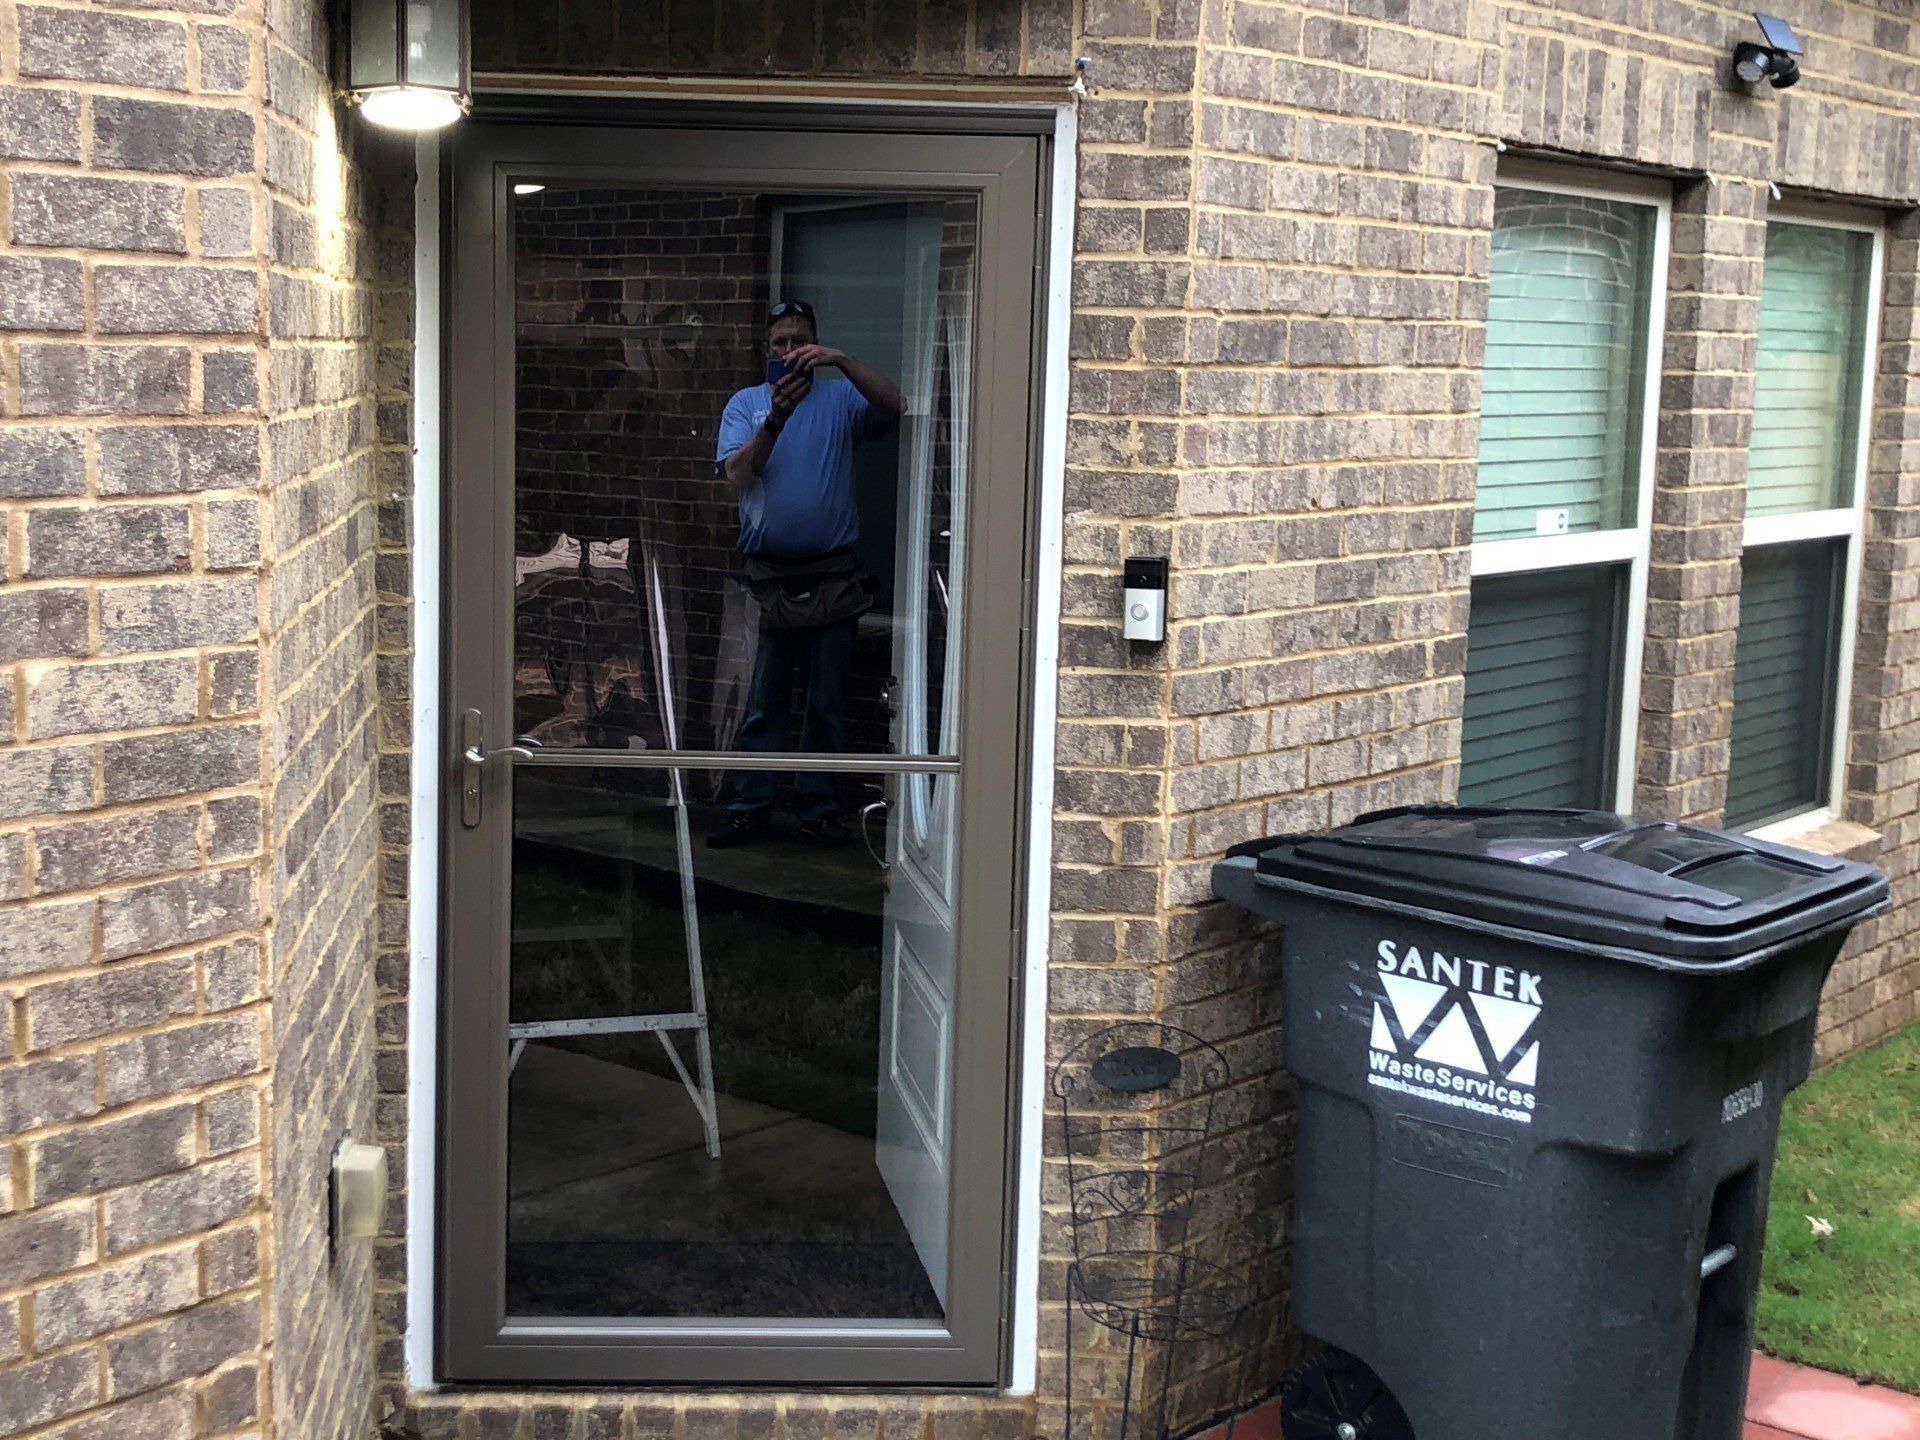 residential tinting in Hoover, AL - SPF Tint installation preventing Direct Sun from pushing through the home's glass door windows causing heat differentials and UV Sun Fade to the interior. Hoover, AL